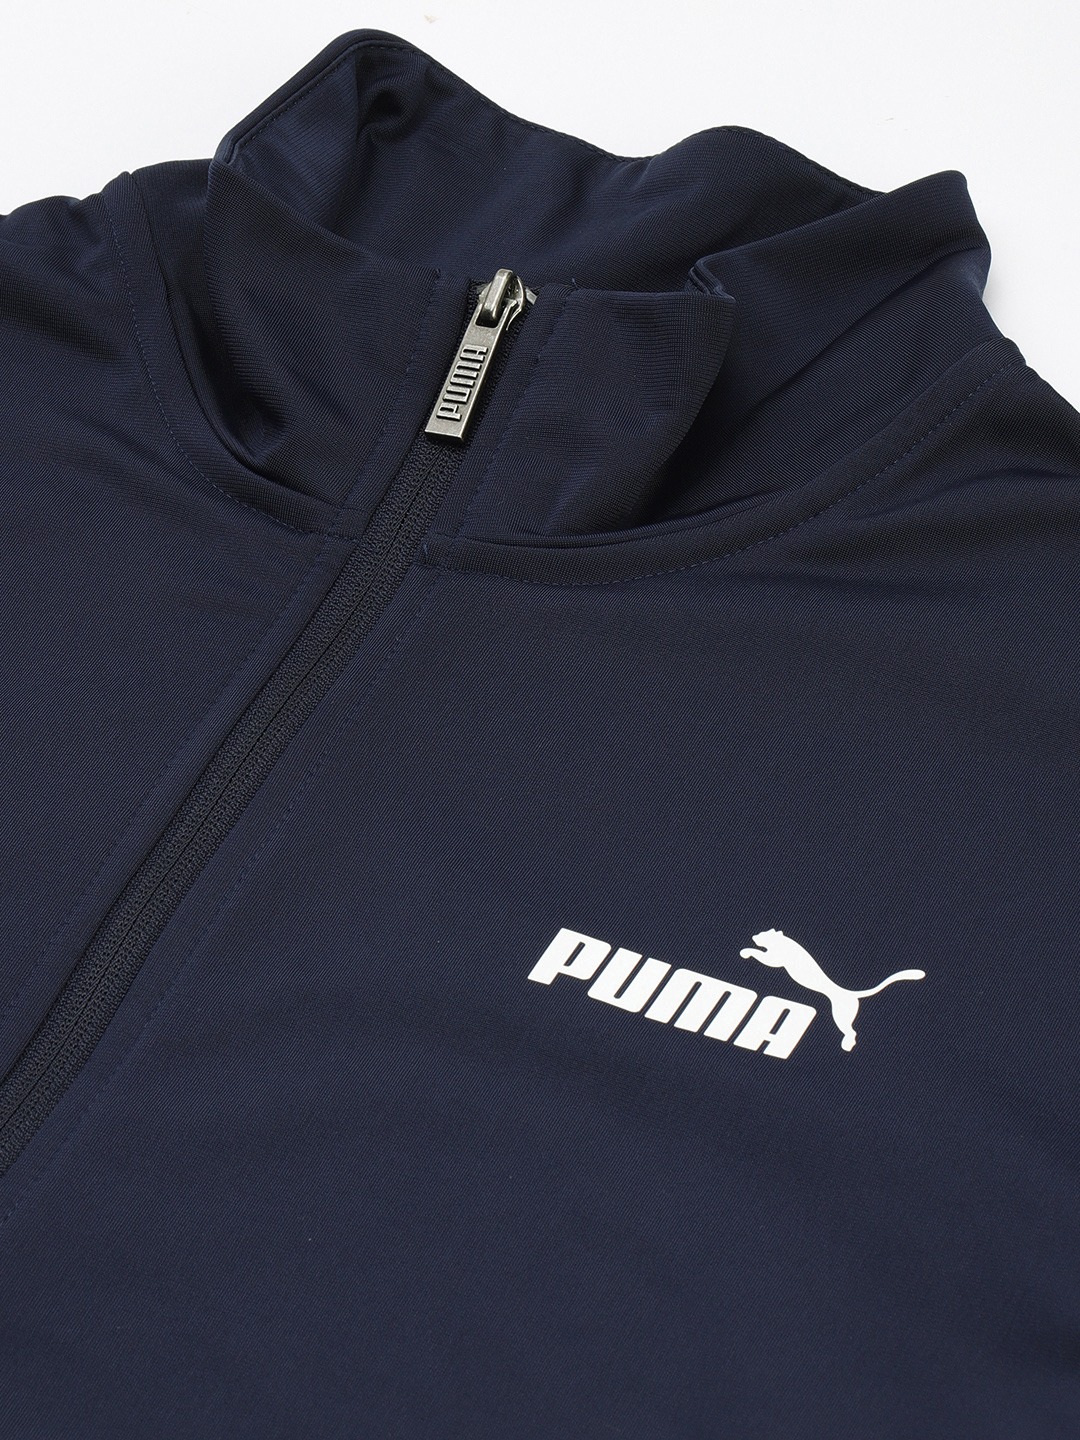 Clothing Tracksuits | Puma Men Navy Blue Solid Tape Tracksuit - DT24878